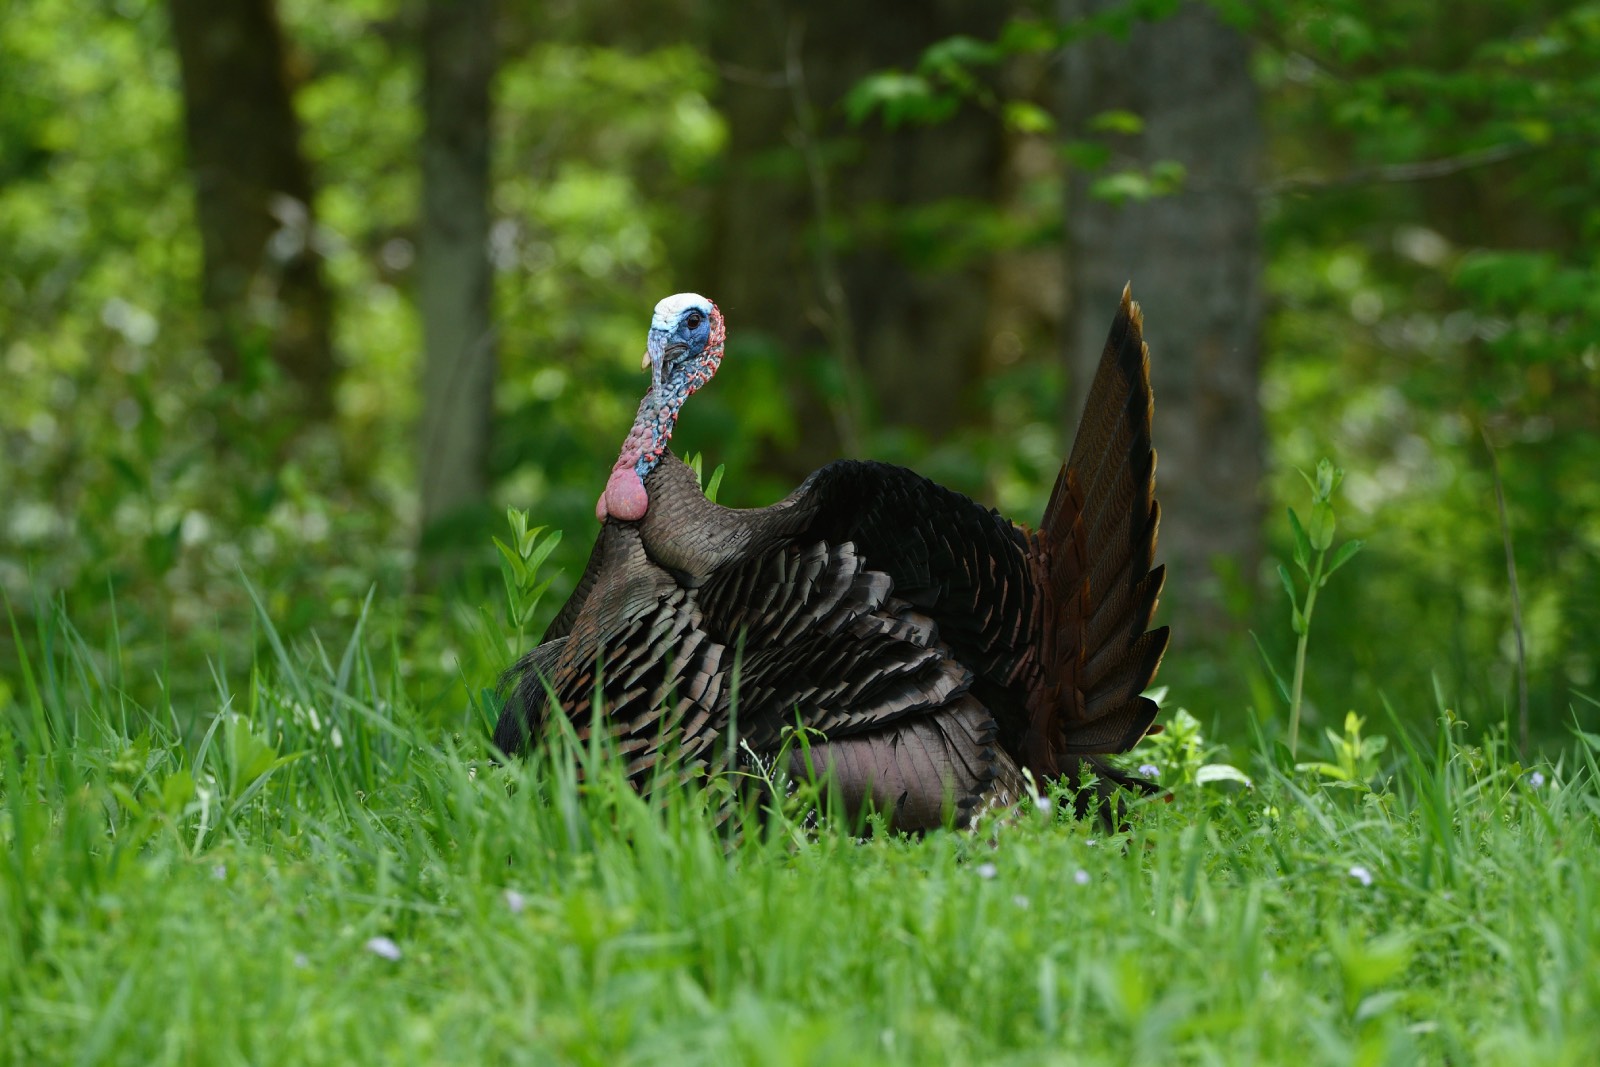 New England gobblers